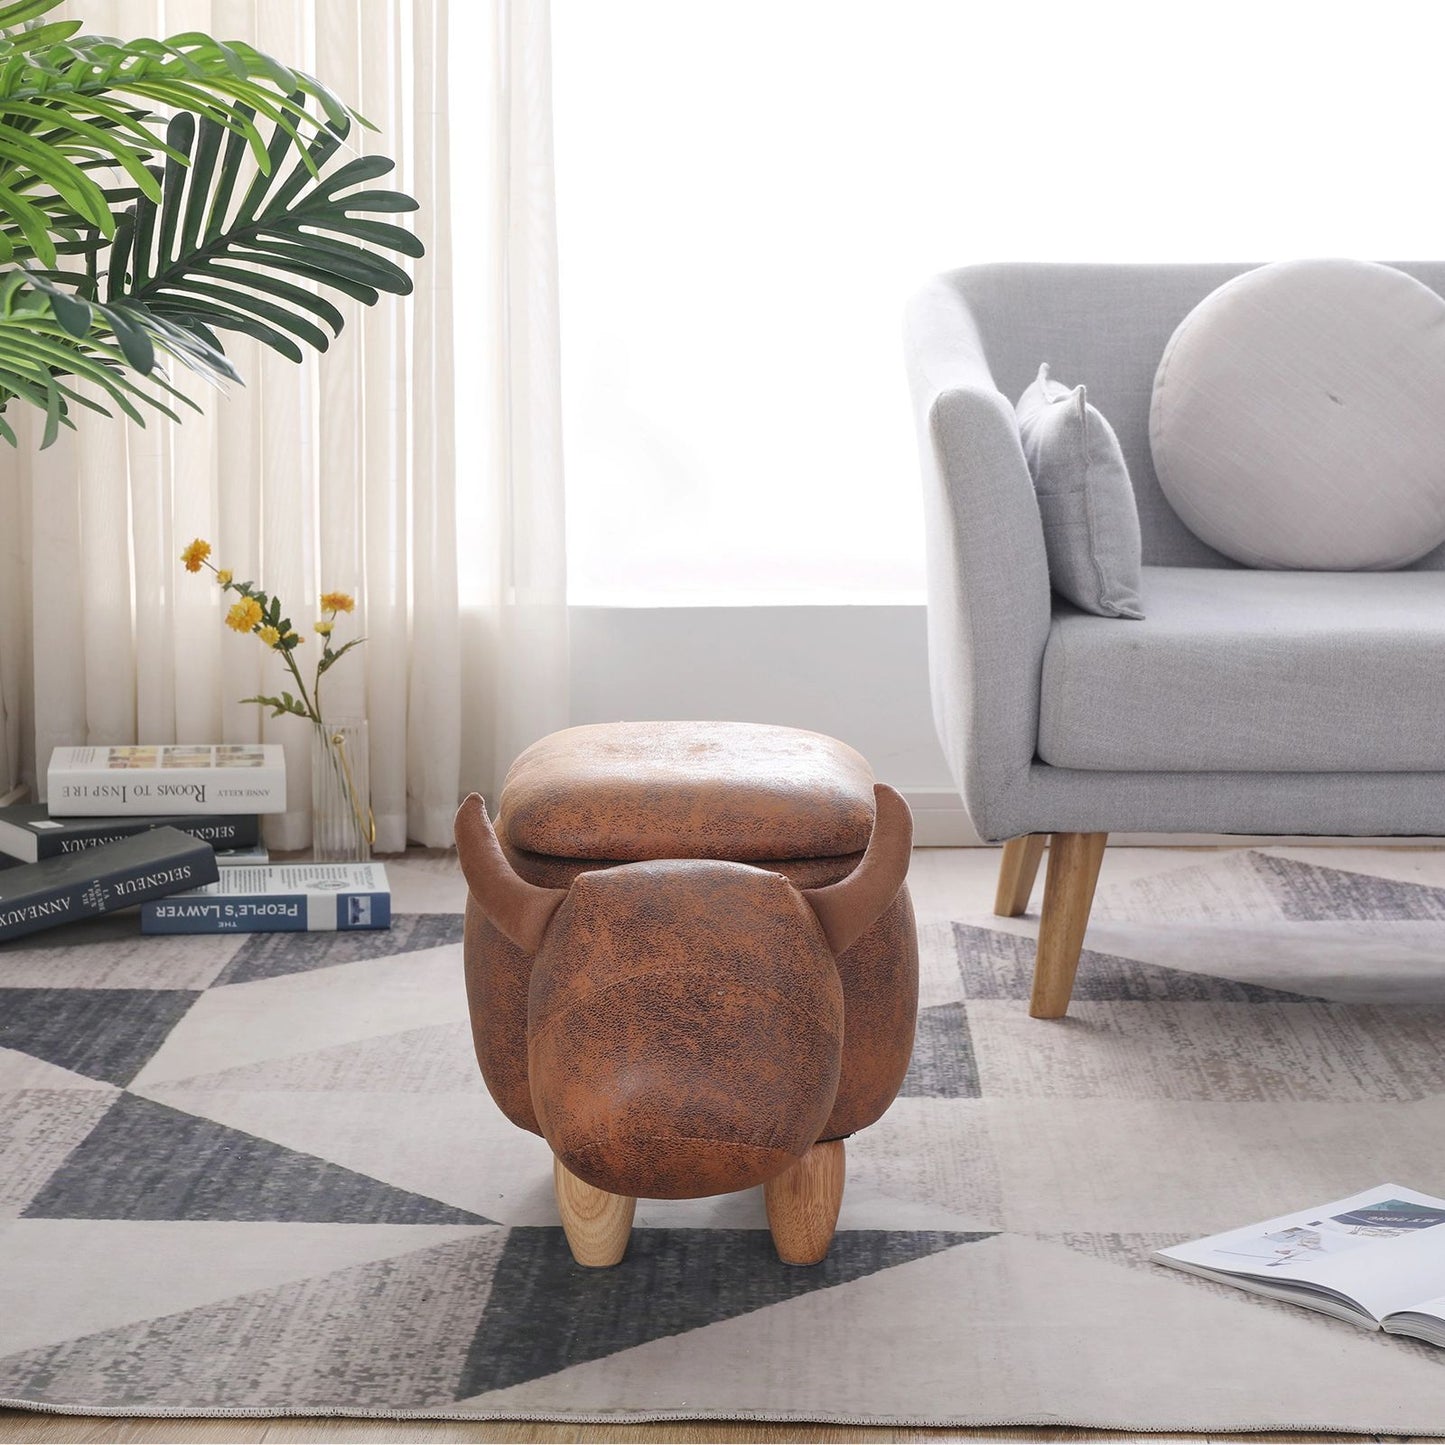 Decorative animal storage stool for kids, ottoman bedroom furniture, brown kids footstool, cartoon chair for home with solid wood legs, decorative footstool for office, bedroom, living room